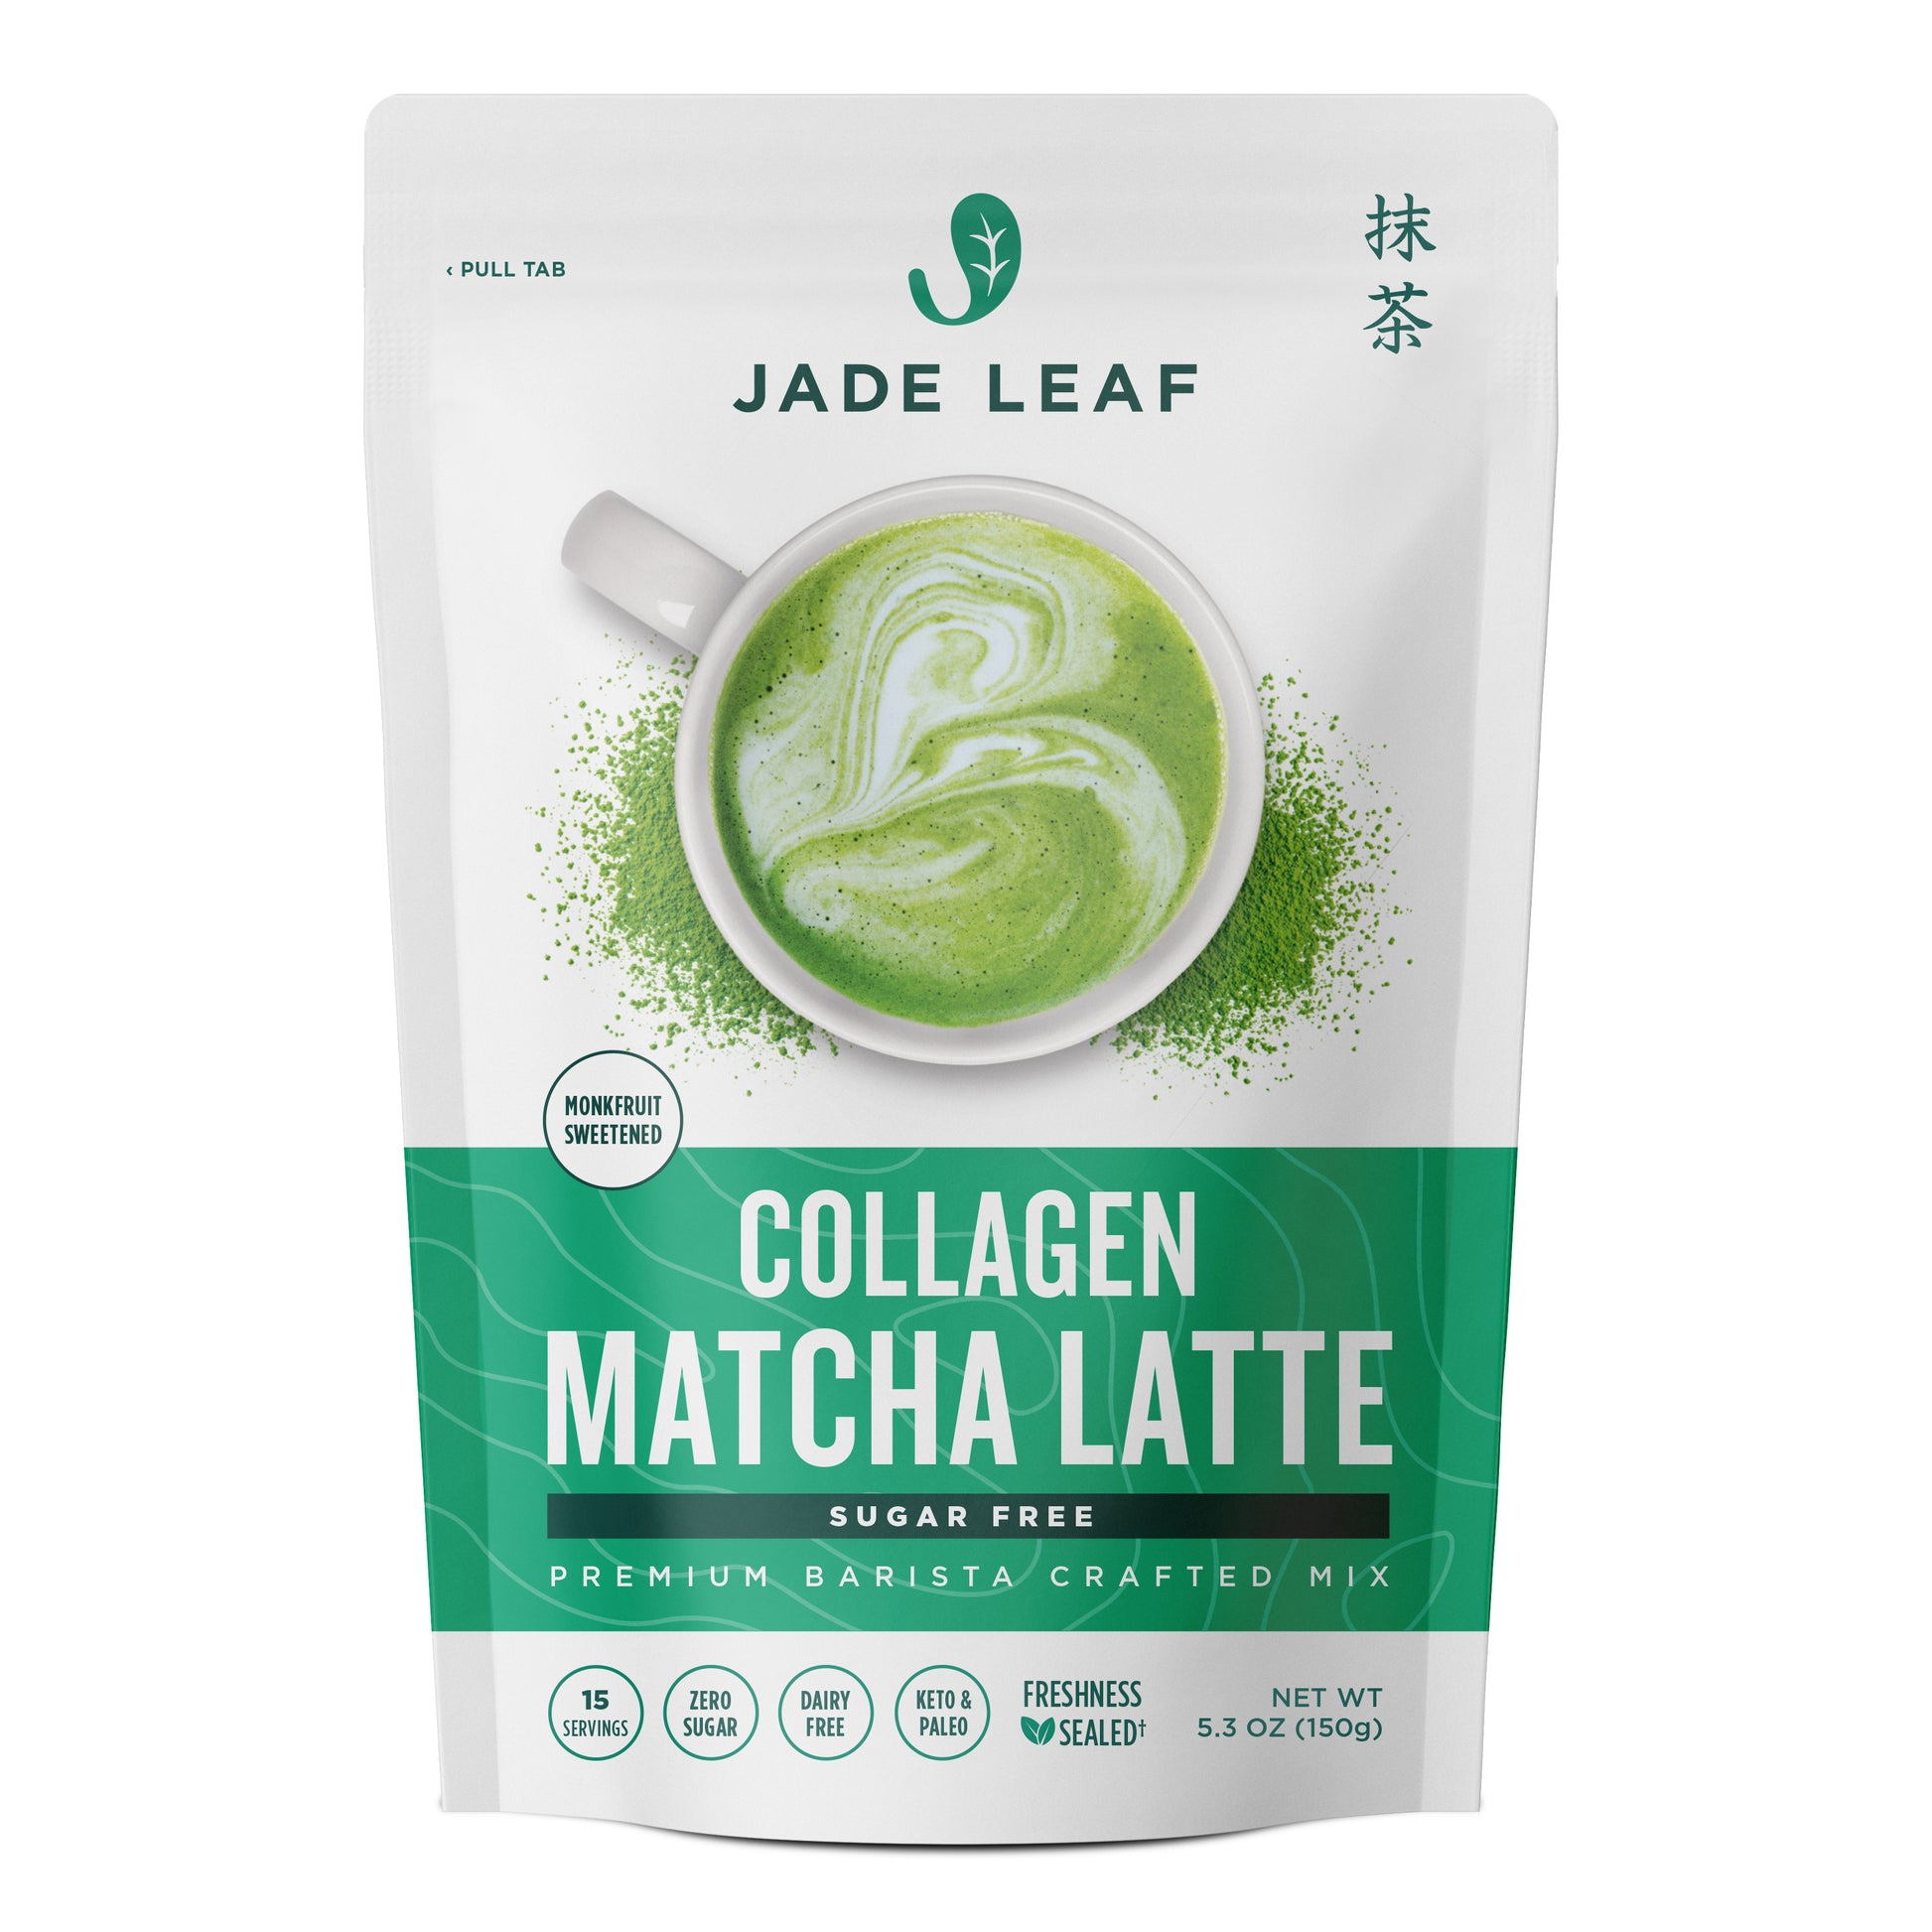 Page 1 - Reviews - Vital Proteins, Matcha Collagen Latte